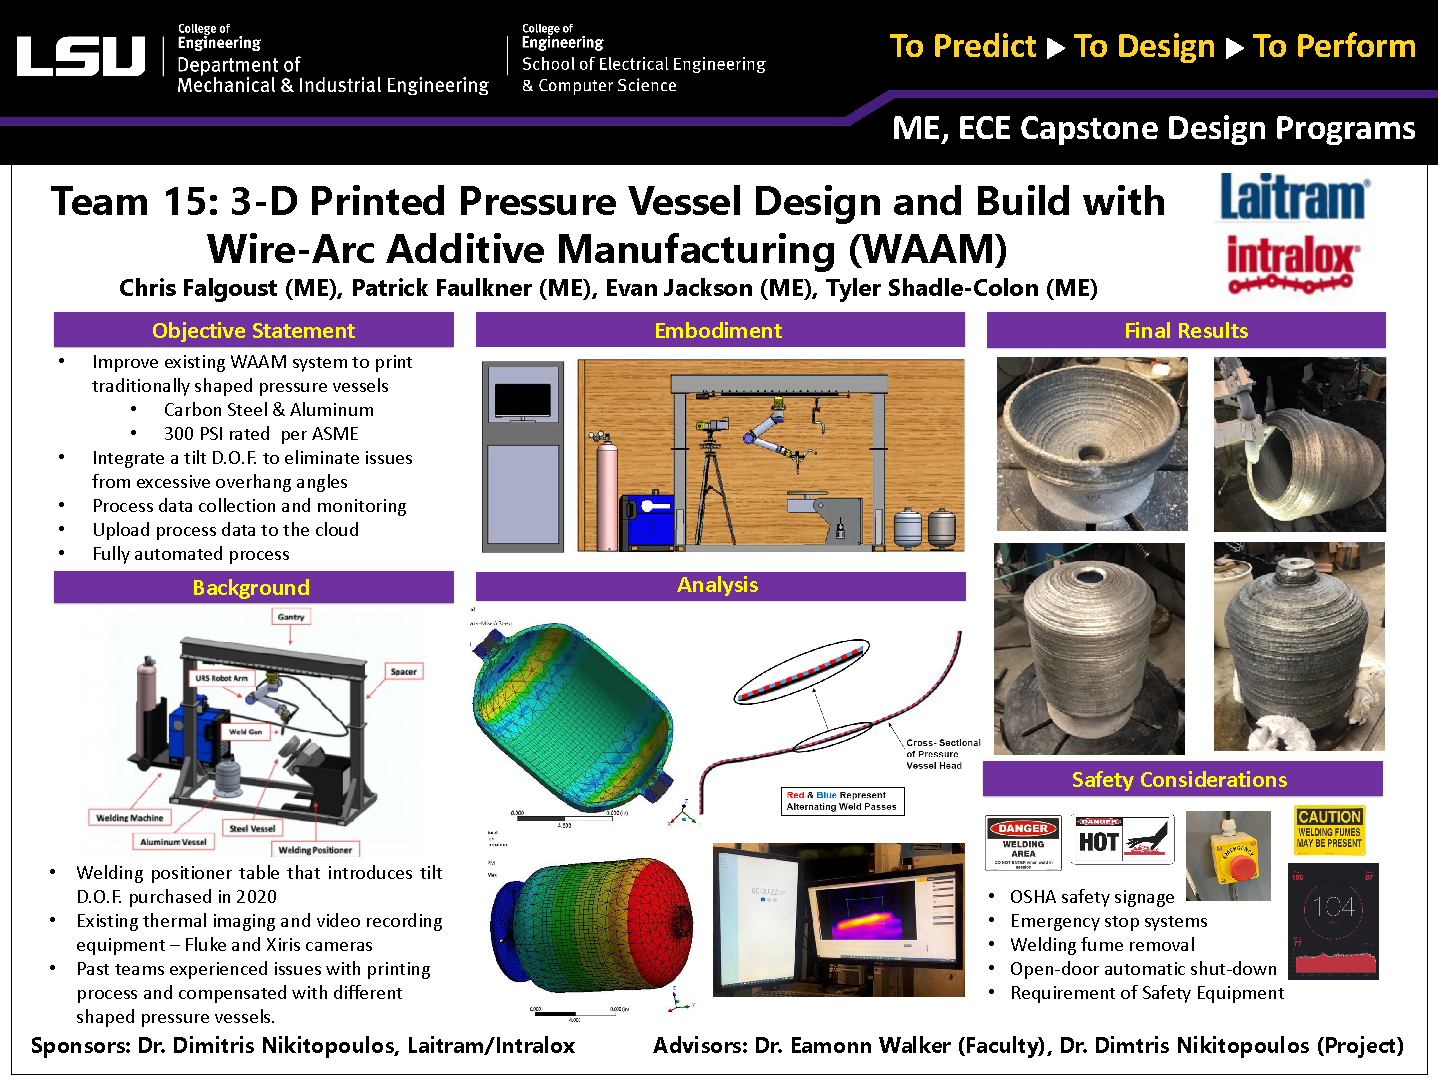 Project 15: 3D-Printed Pressure Vessel Design and Build with Wire-Arc Additive Manufacturing (WAAM) (2021)